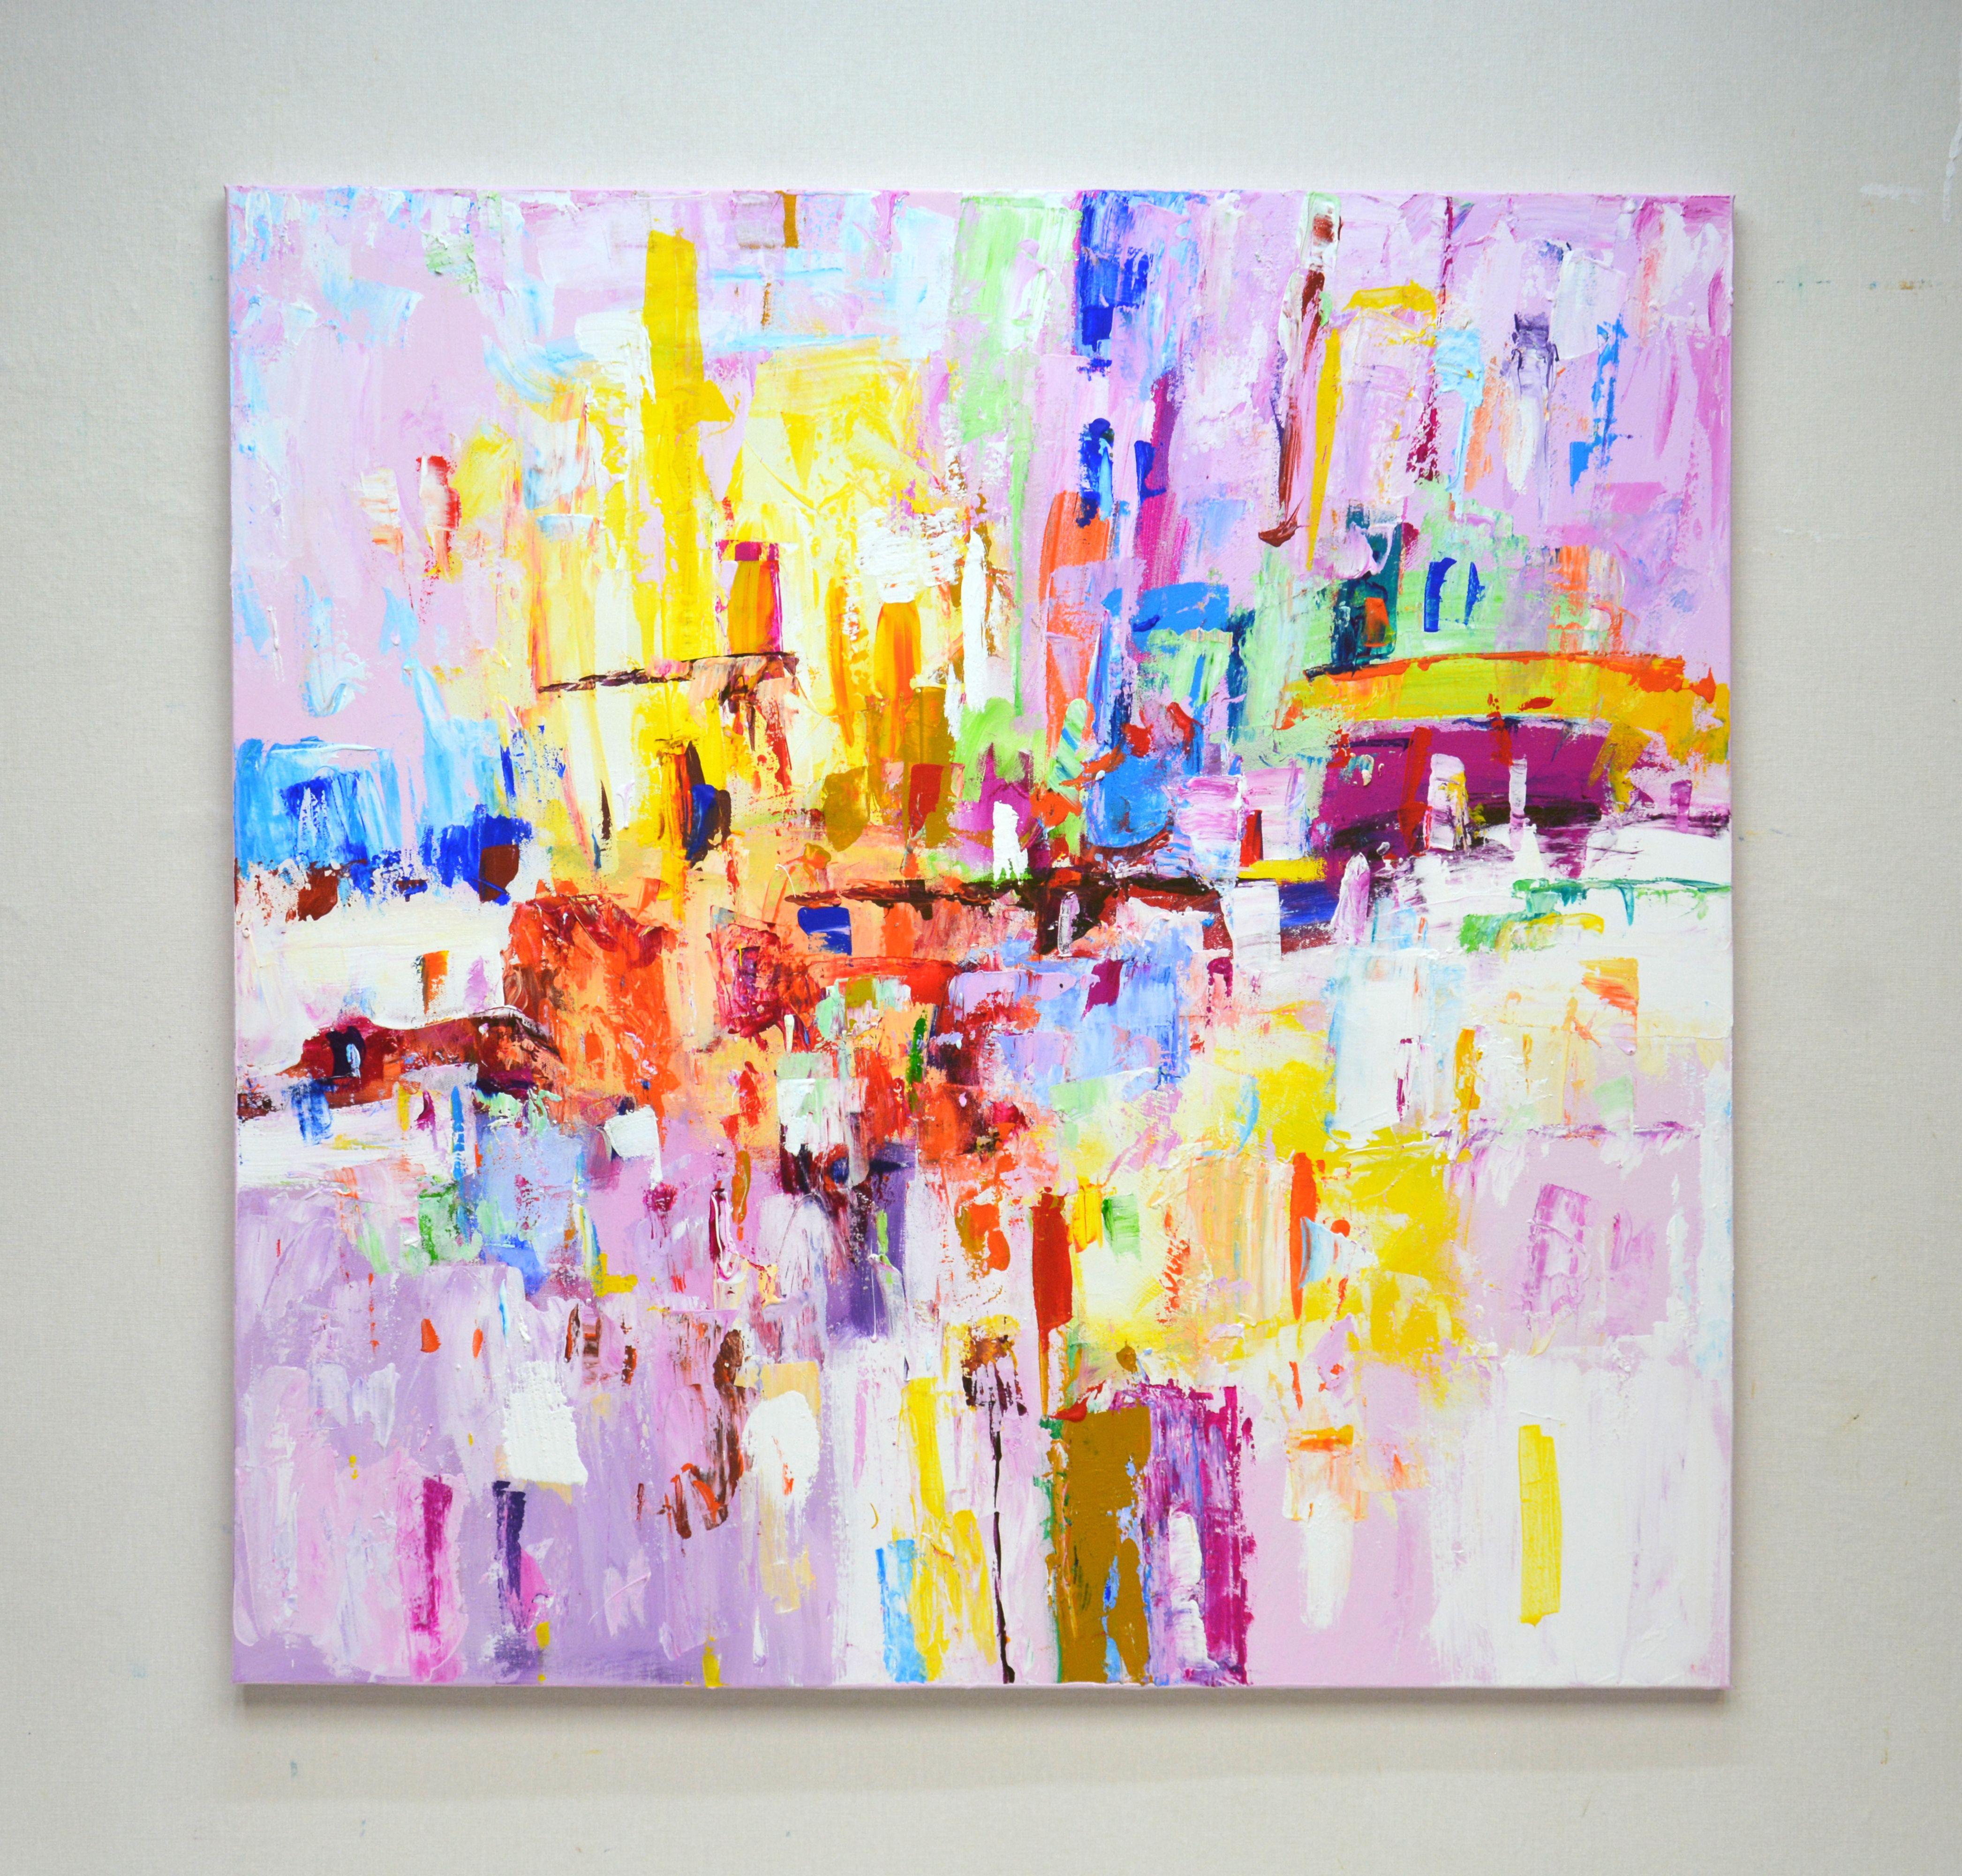 City of joy. This original abstract acrylic painting will highlight your interior. The product has a modern aesthetic design and is filled with positive energy. Colors overlap and overlap each other, and also stand out with subtle and vibrant color